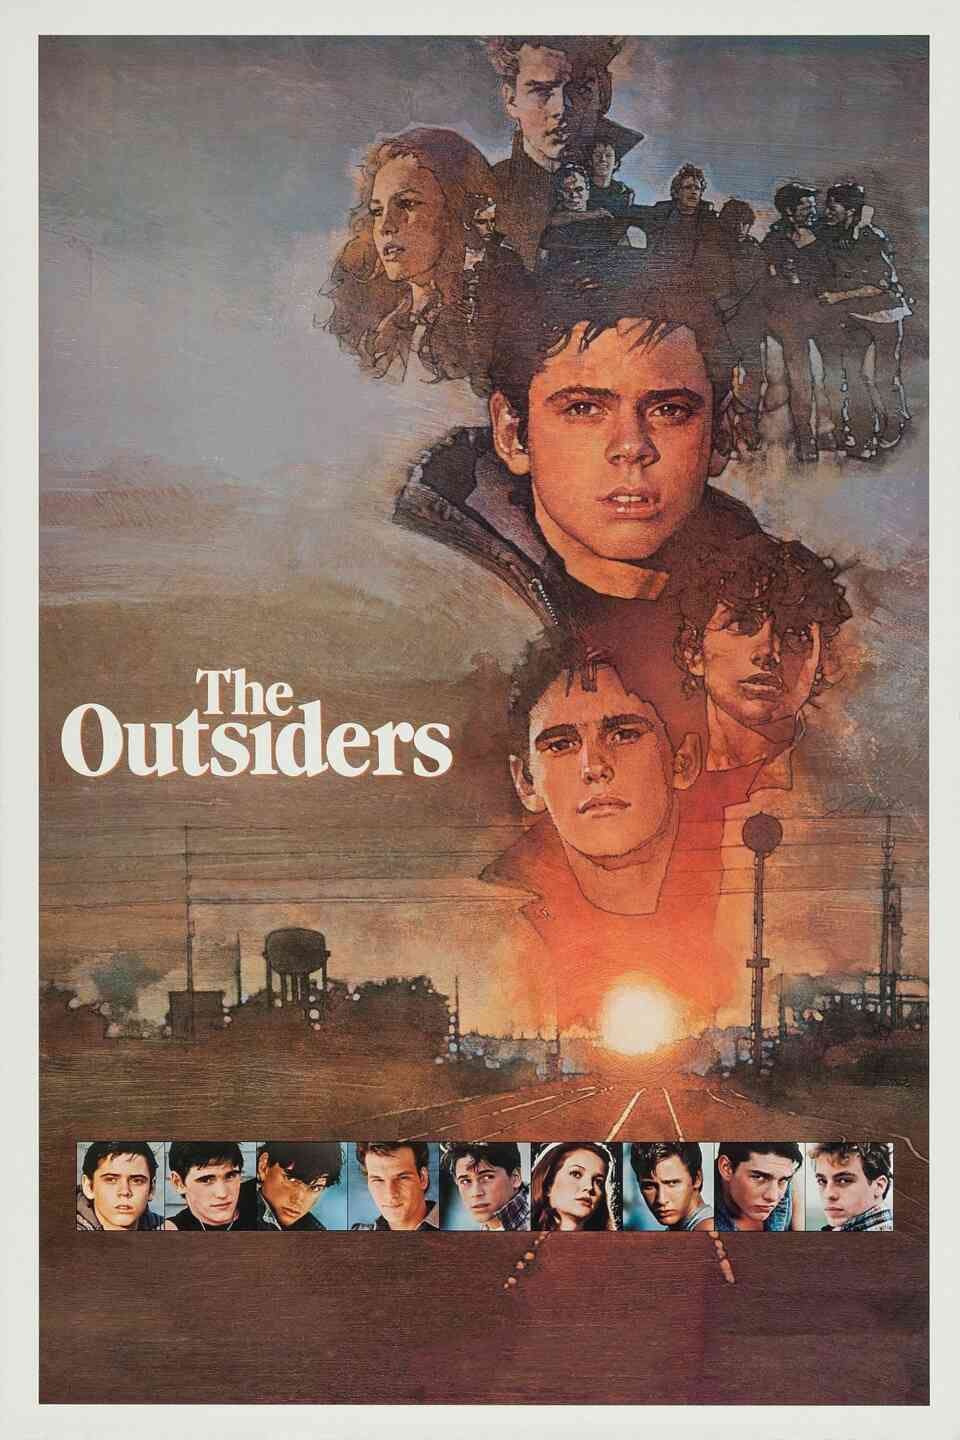 Read The Outsiders screenplay (poster)